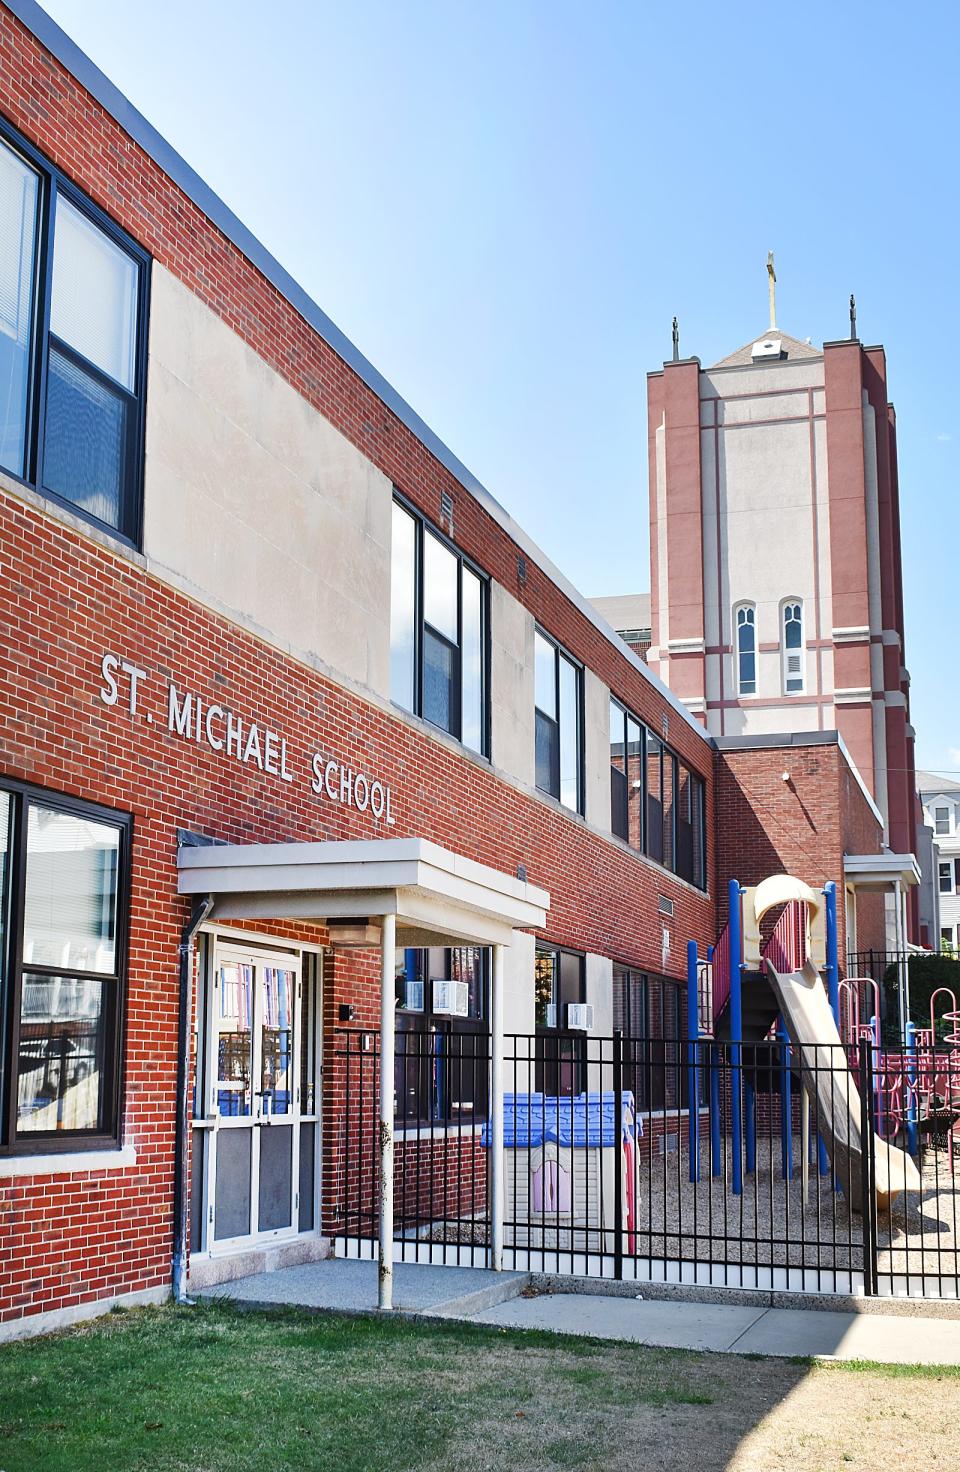 St. Michael's School, in Fall River, has been awarded $1,593,505 in state ARPA funds through the ARP Emergency Assistance to Non-Public Schools (EANS-II) program.